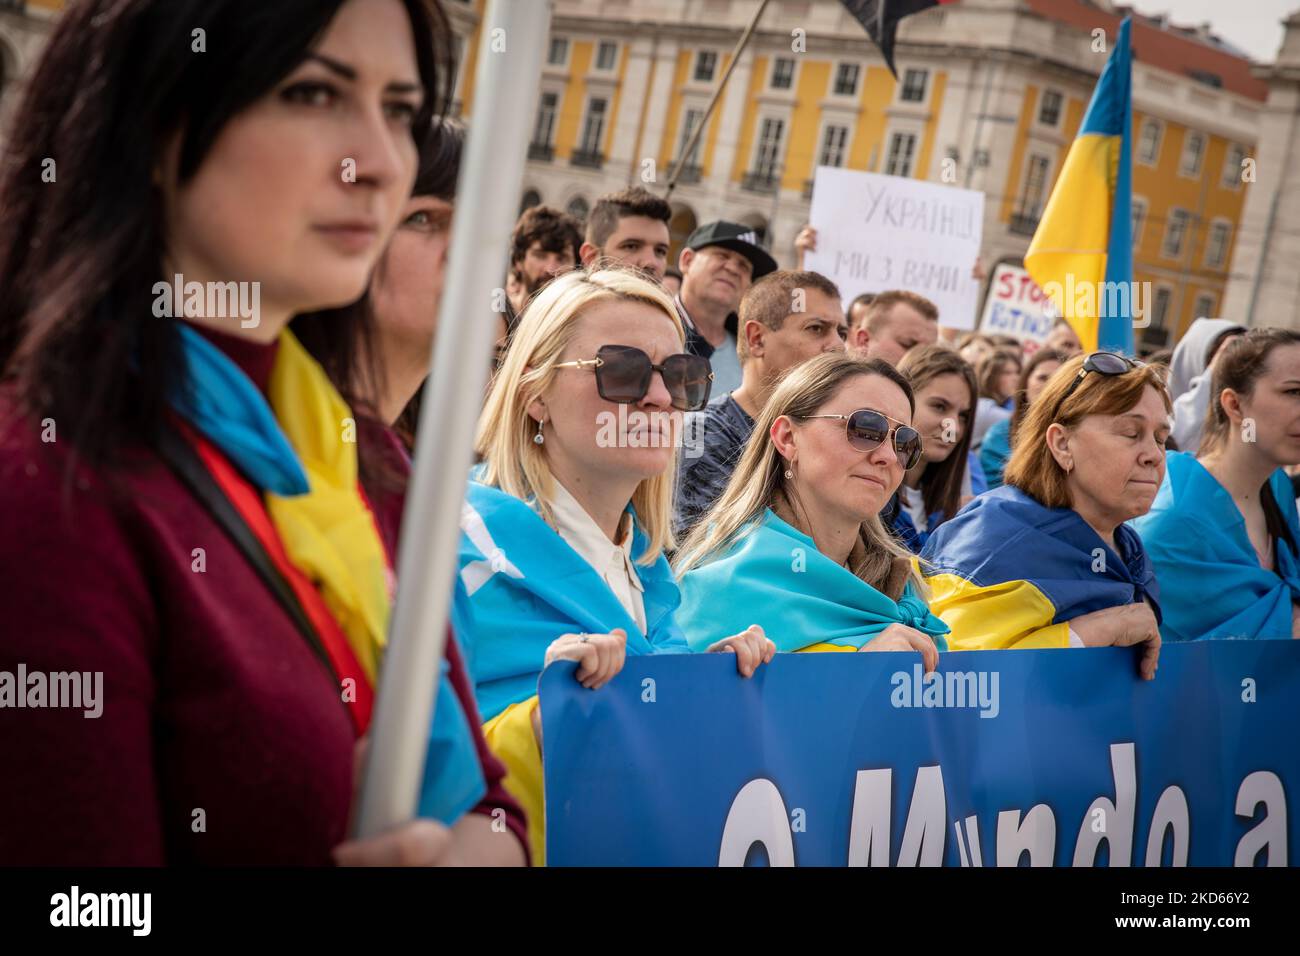 People wearing the Ukrainian flag are seen in Praca do Comercio, in Lisbon, Portugal during a demonstration to show solidarity with the people of that country following the Russian invasion on March 27, 2022. - More than 3.8 million people have fled Ukraine since Russia's invasion a month ago, UN figures showed on March 27, but the flow of refugees has slowed down markedly. The UN refugee agency, UNHCR, said 3,821,049 Ukrainians had fled the country -- an increase of 48,450 from the figures of March 26. (Photo by Manuel Romano/NurPhoto) Stock Photo